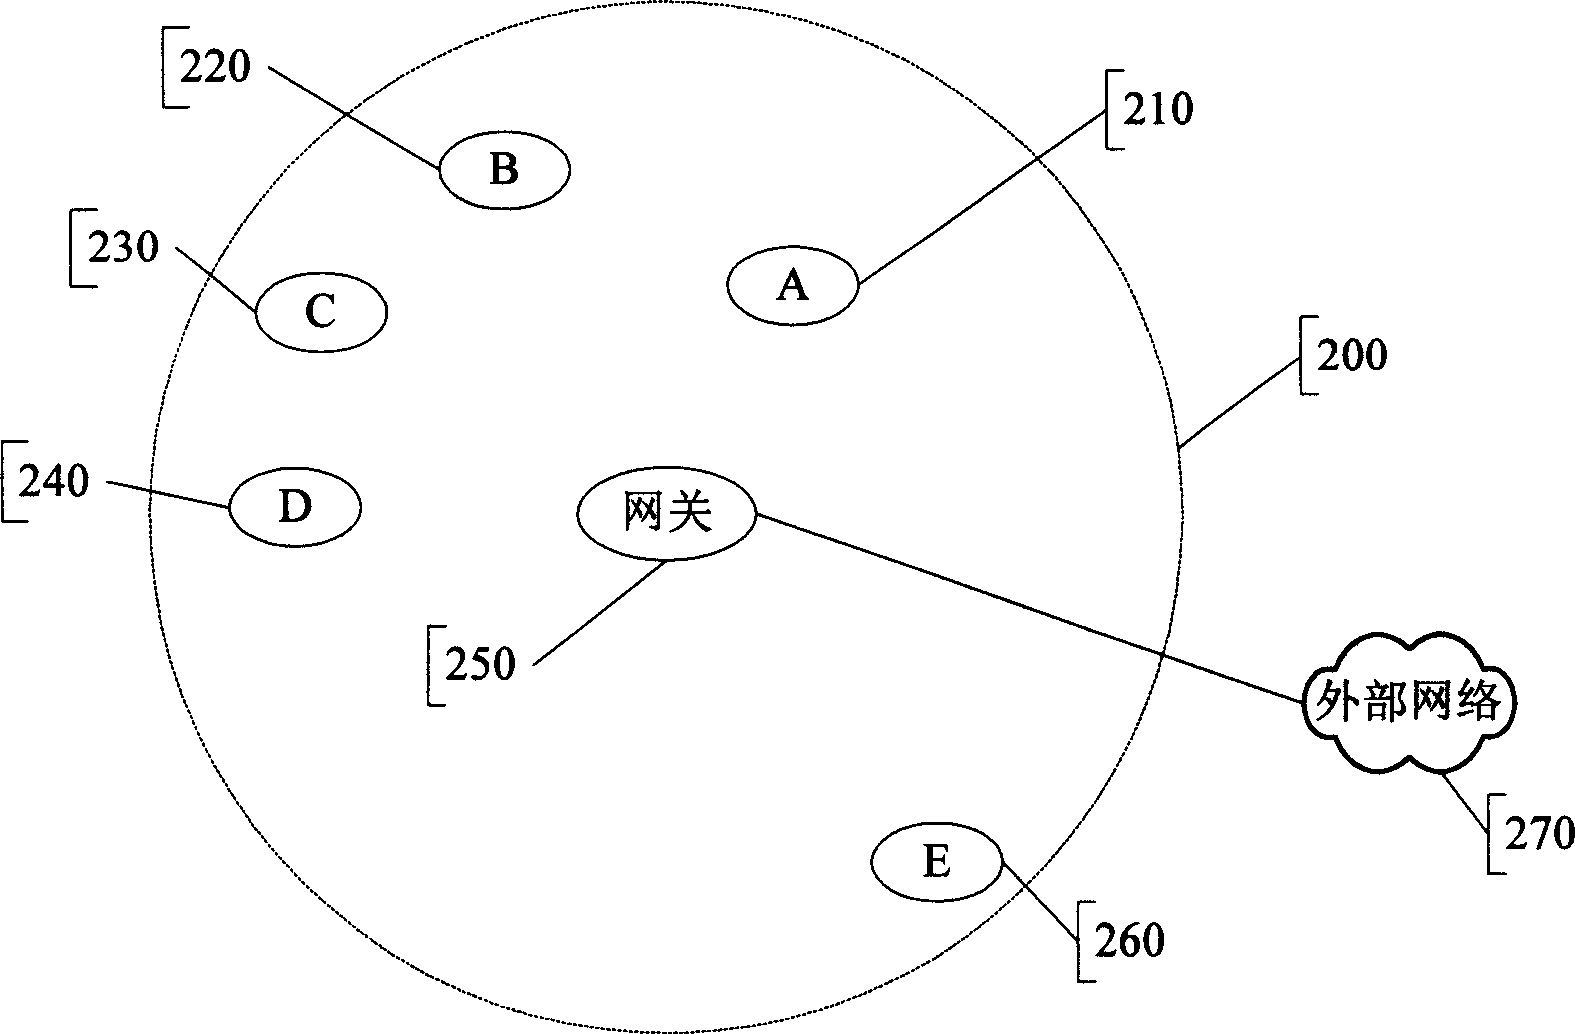 A method for implementing call forwarding of blue tooth handset by using dynamic extension number